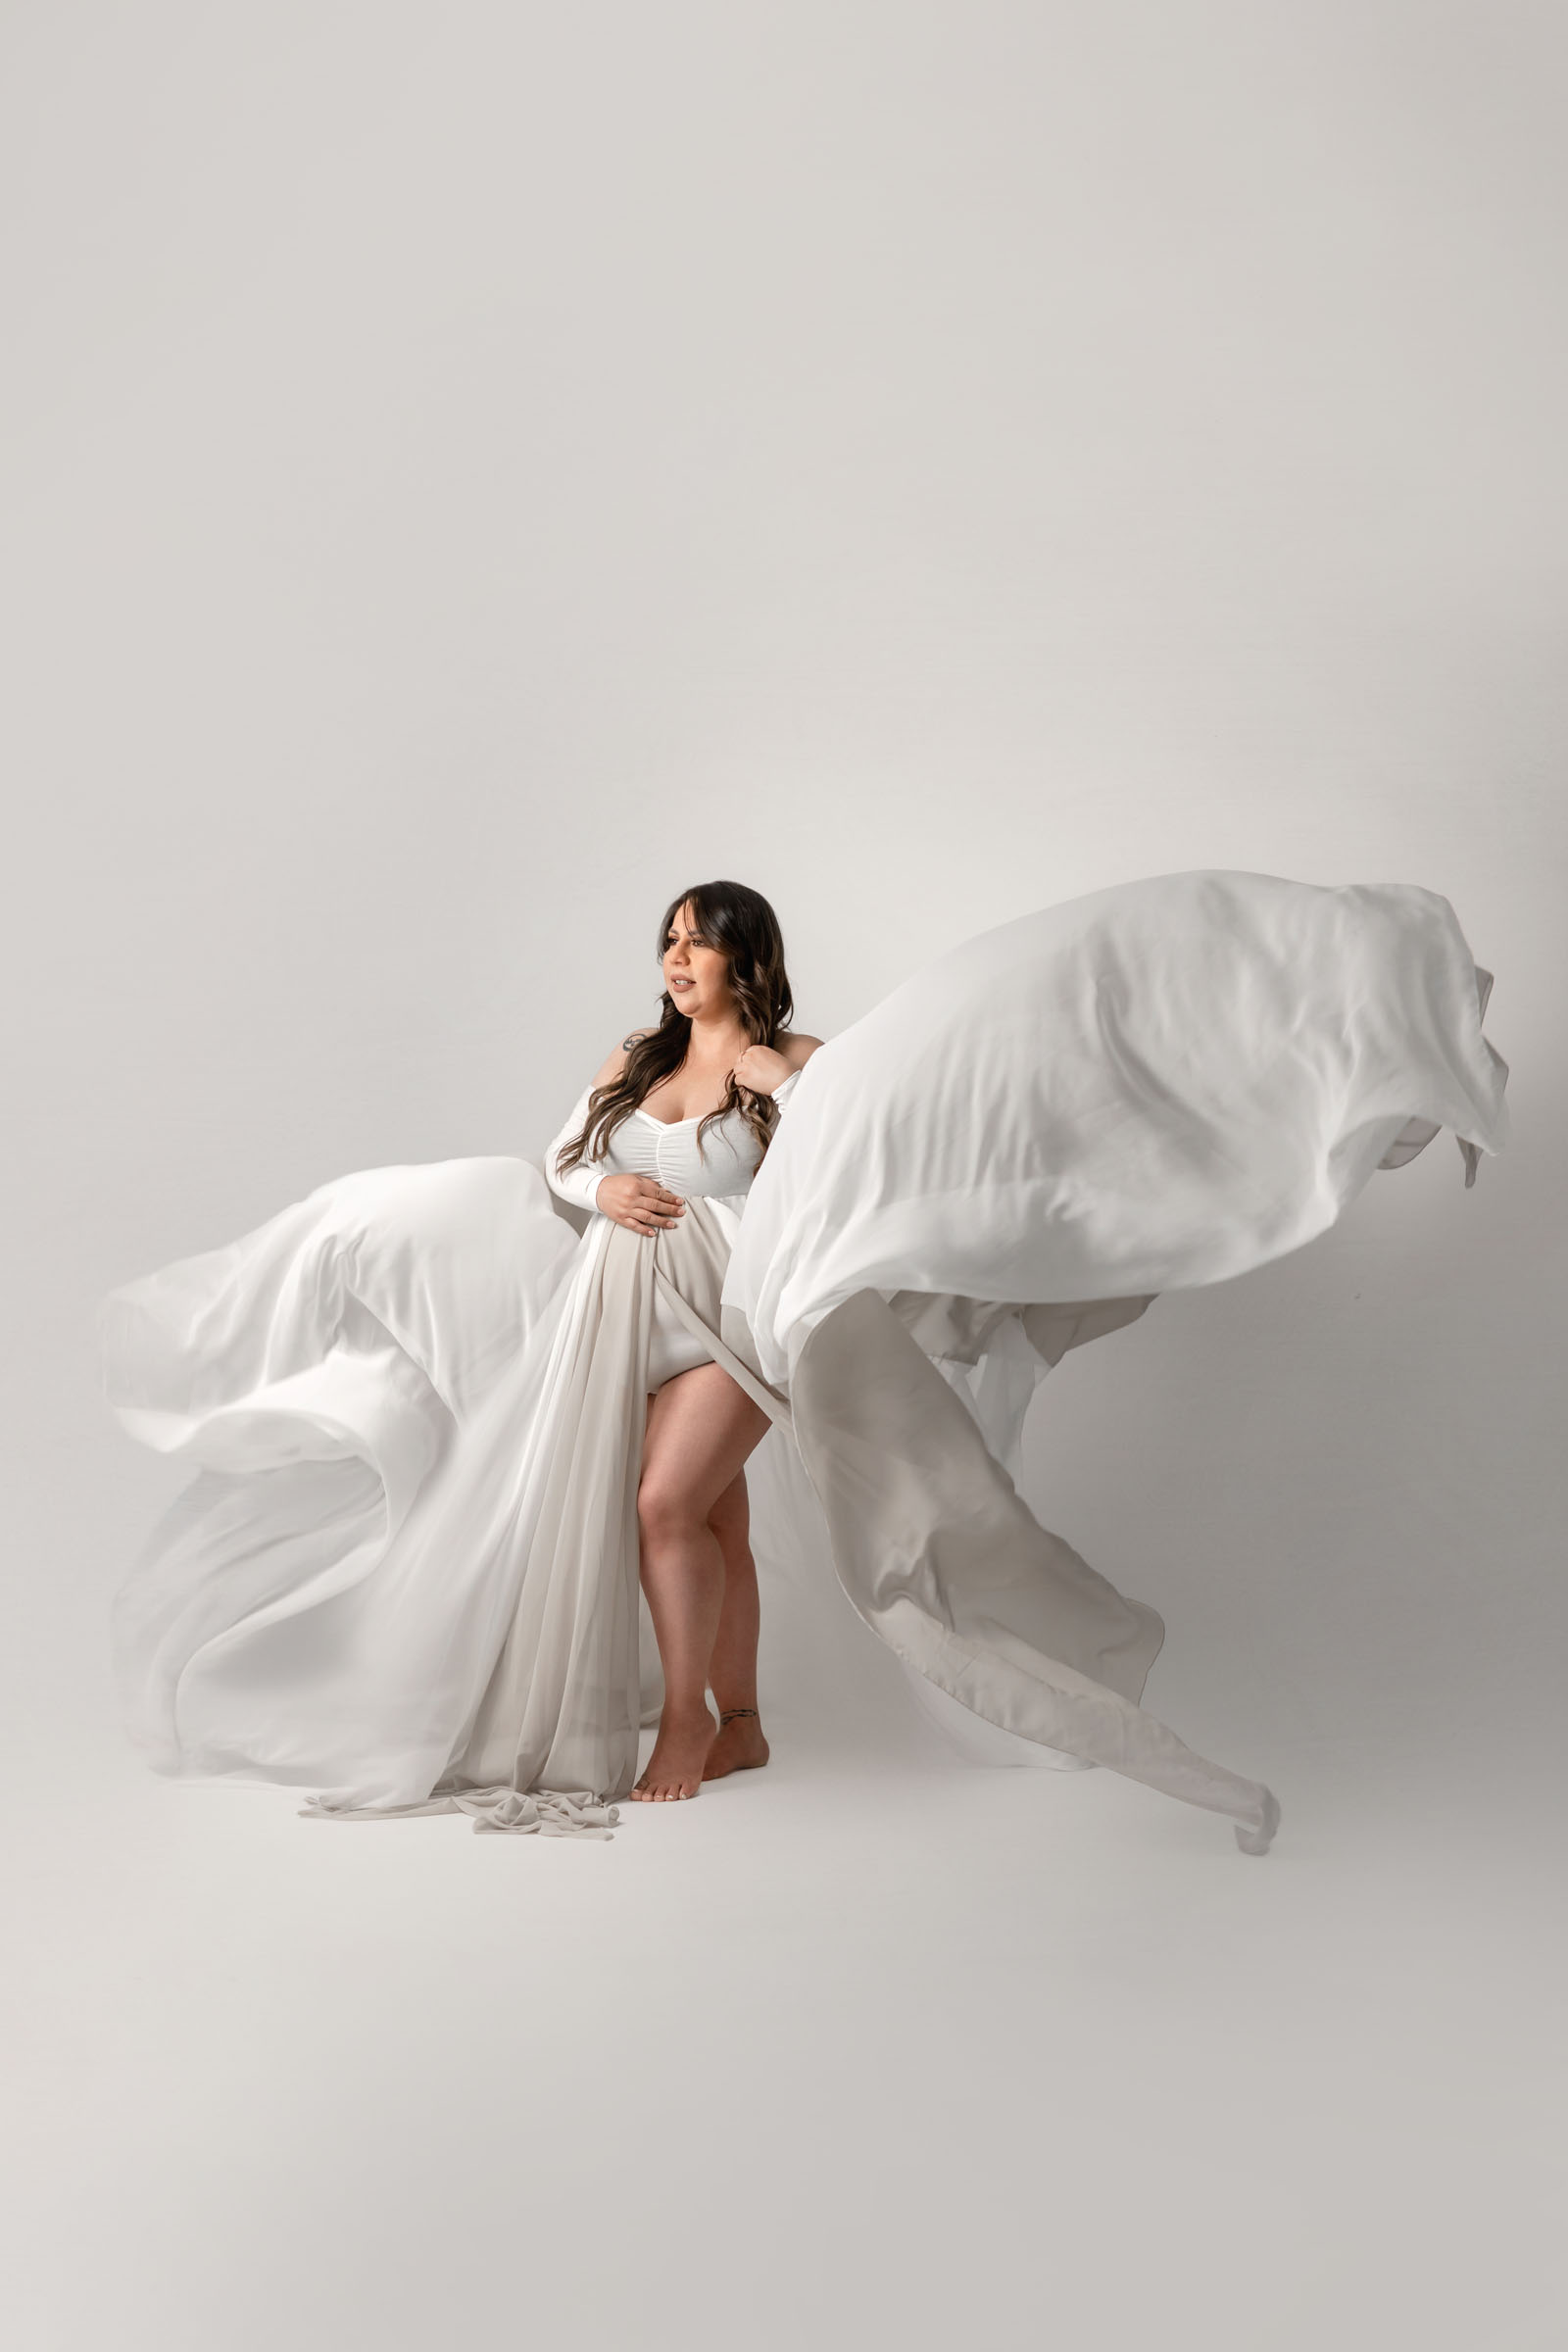 Double Trouble Maternity Gown sample from San Diego Studio Maternity Photoshoot